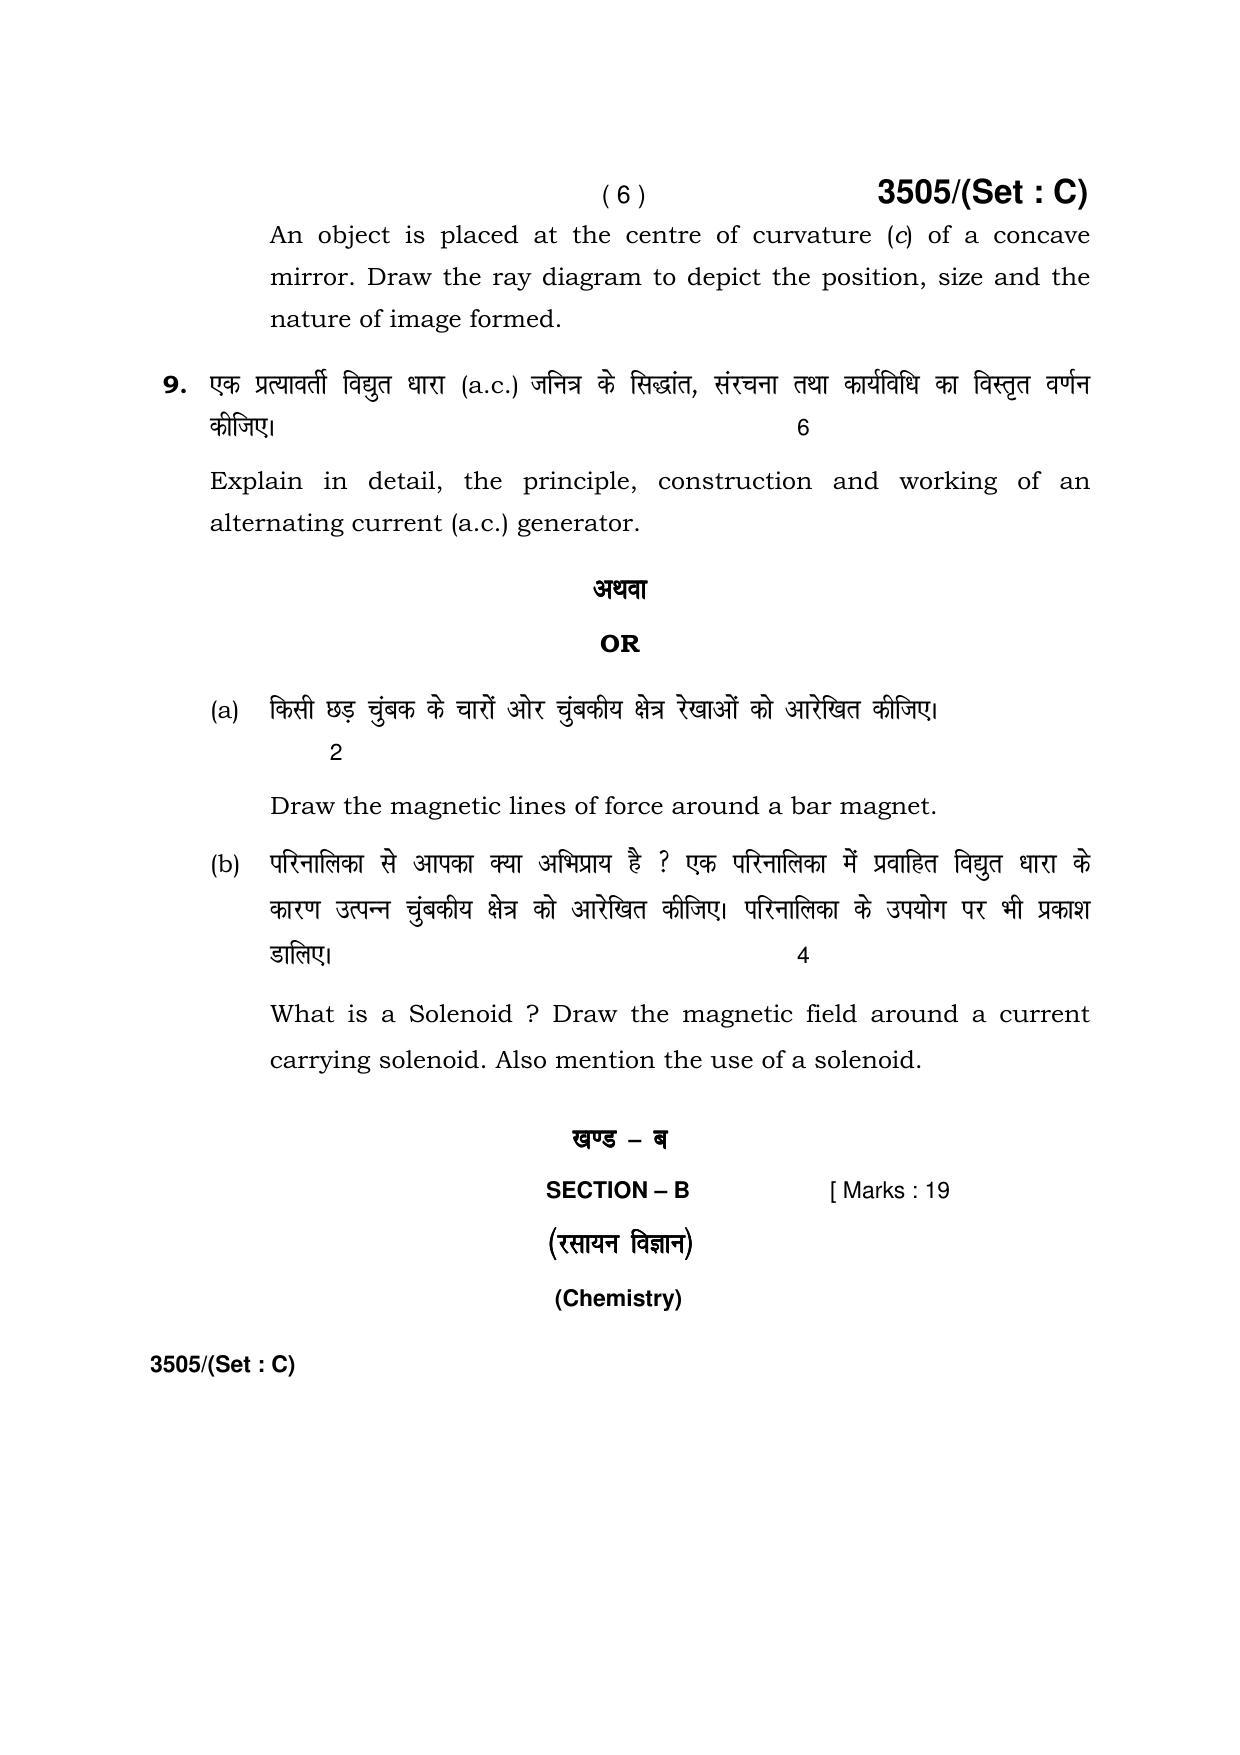 Haryana Board HBSE Class 10 Science -C 2018 Question Paper - Page 6